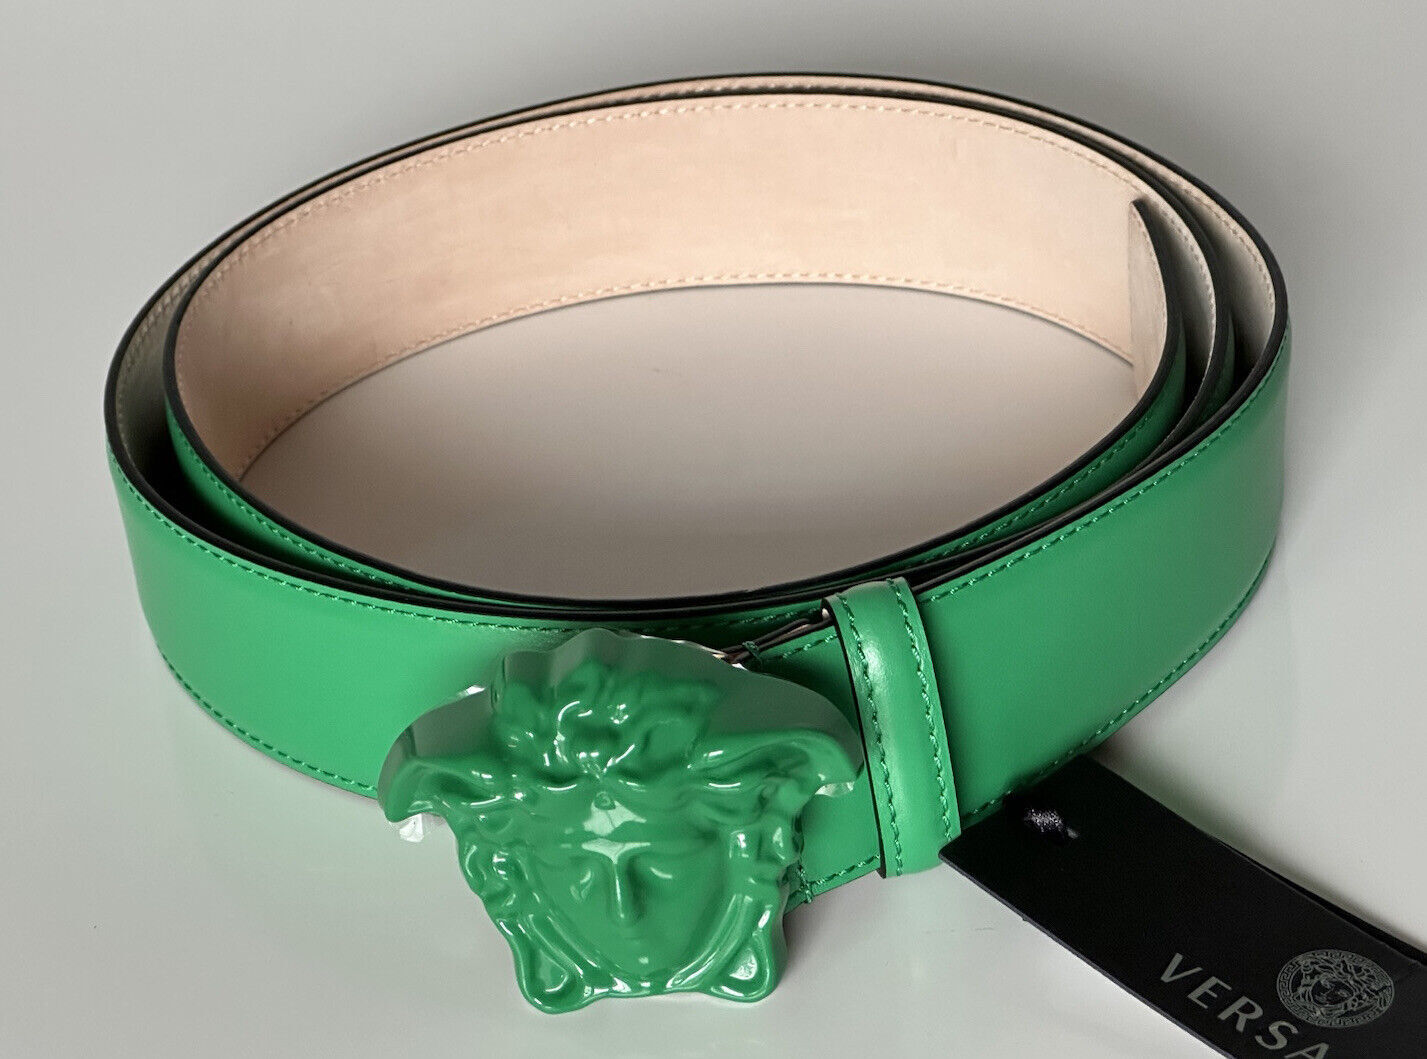 NWT $525 Versace Medusa-Buckle Bright Green Leather Belt 75 (30) Italy DCU4140